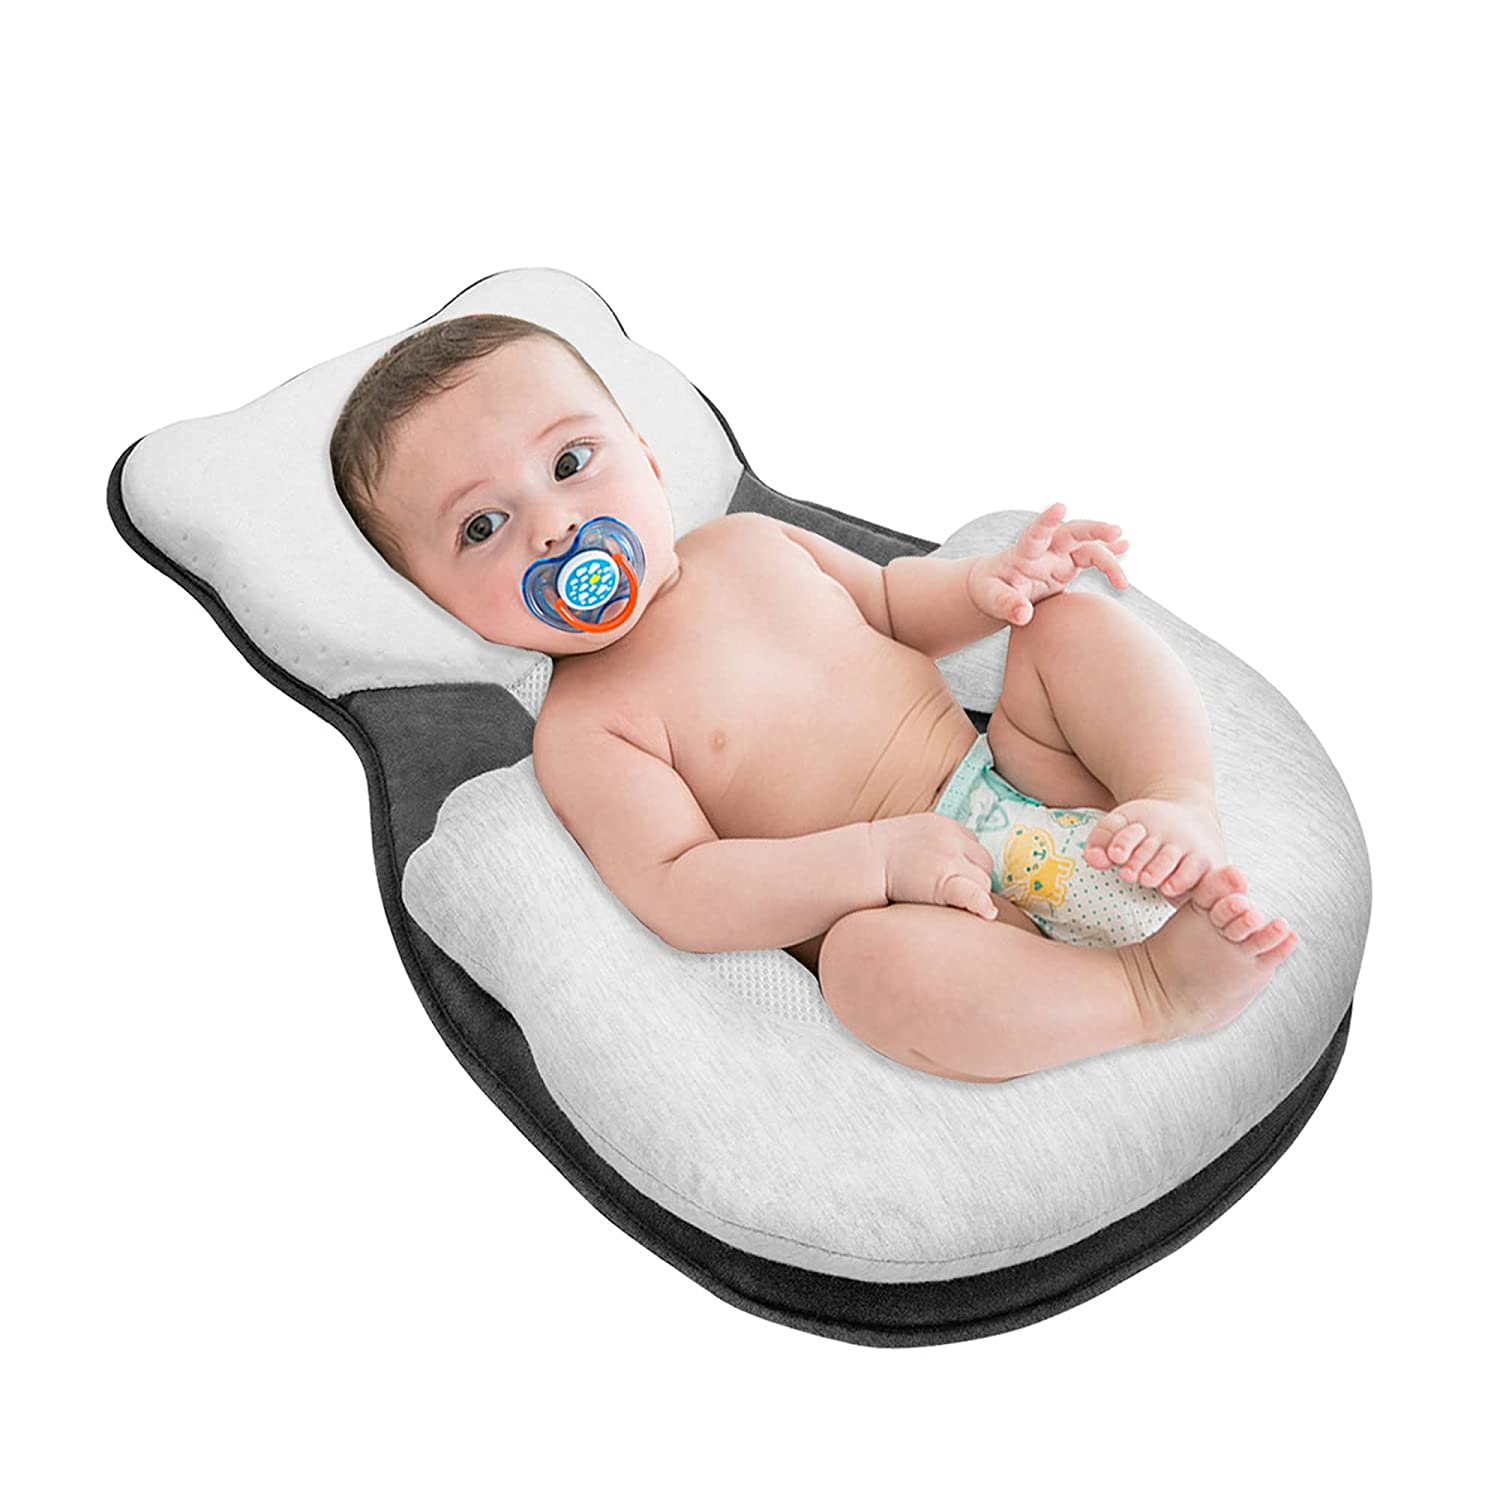 Vinmall Portable Newborn Support Lounger Pillow for 0-12 Months